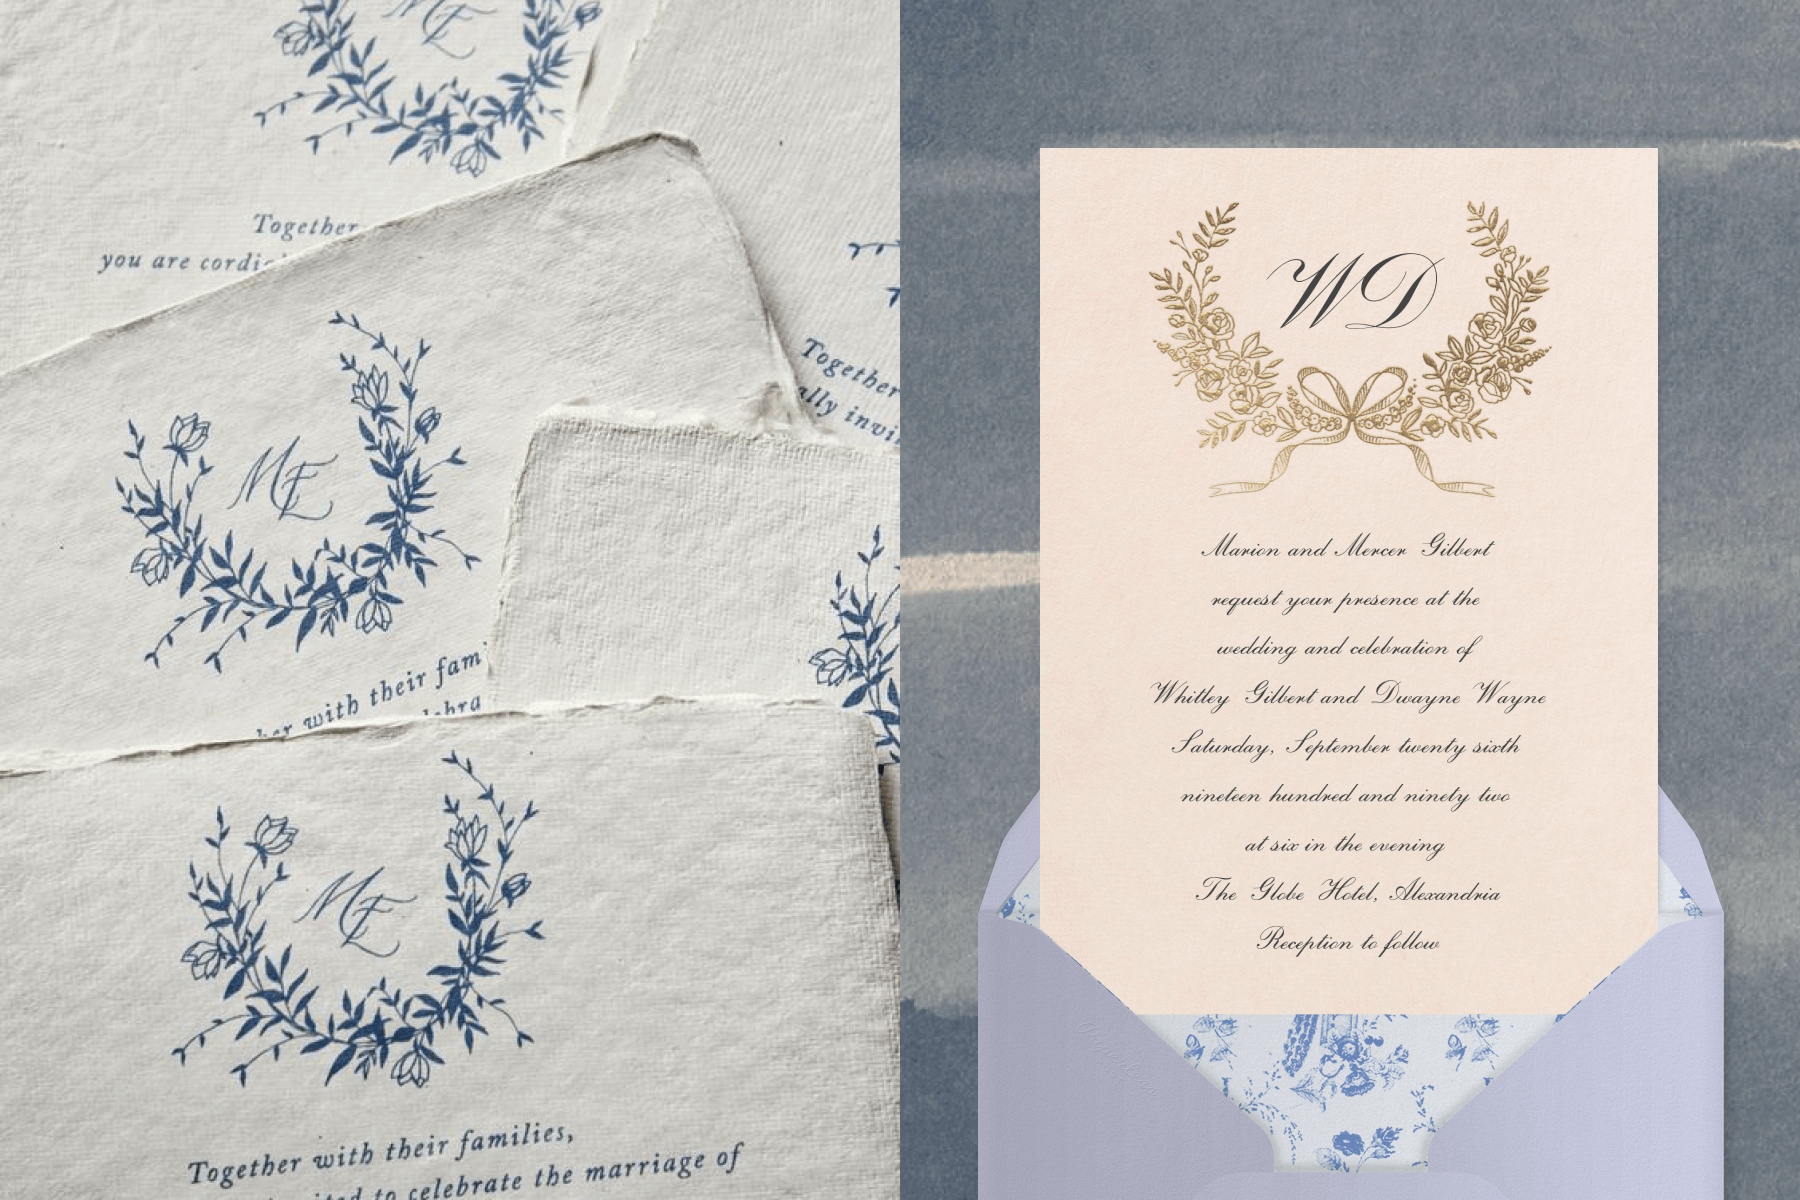 Left: Several sheets of handmade paper feature a blue signature crest with an arc of flowers and monogram. Right: A light pink wedding invitation features a monogram and gold crest of flowers and greenery with a bow emerging from a lavender envelope.